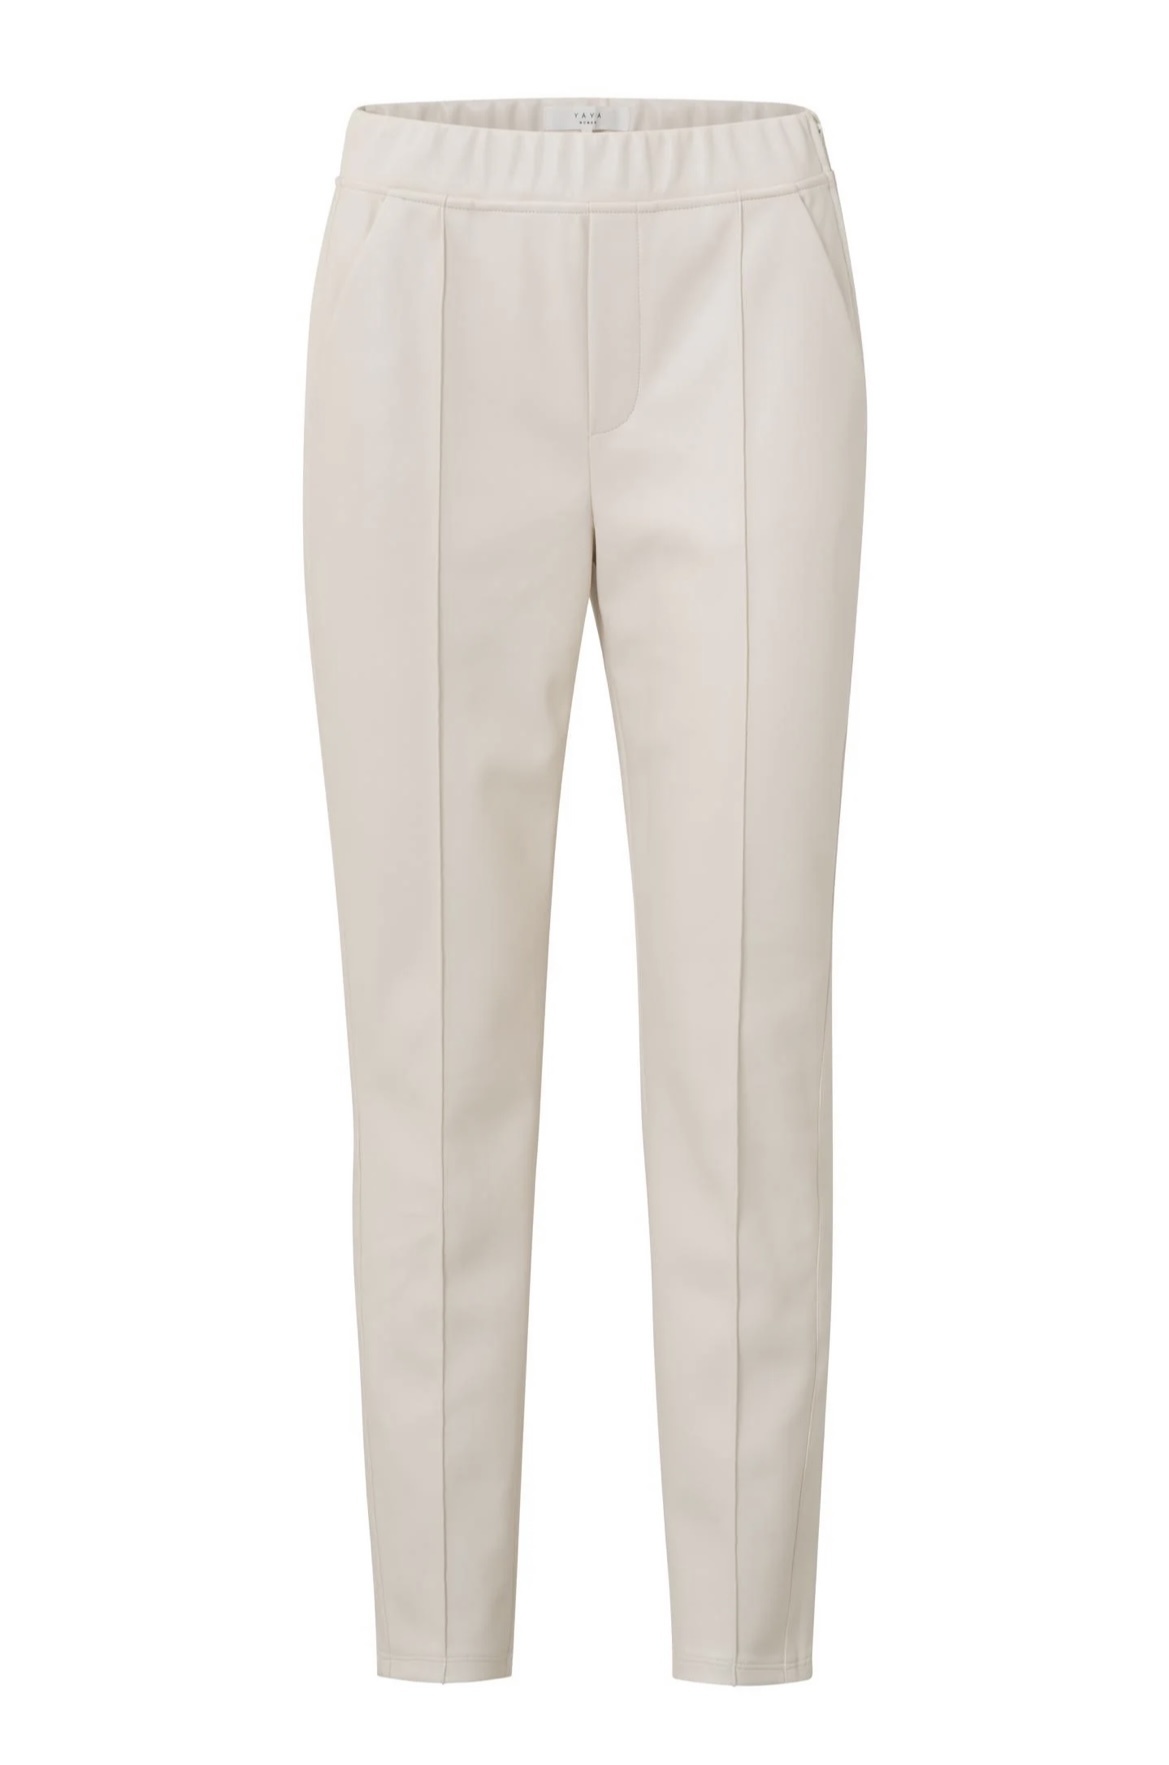 On foot Untouched Vest womens cream leather trousers Untouched To take care  grinning